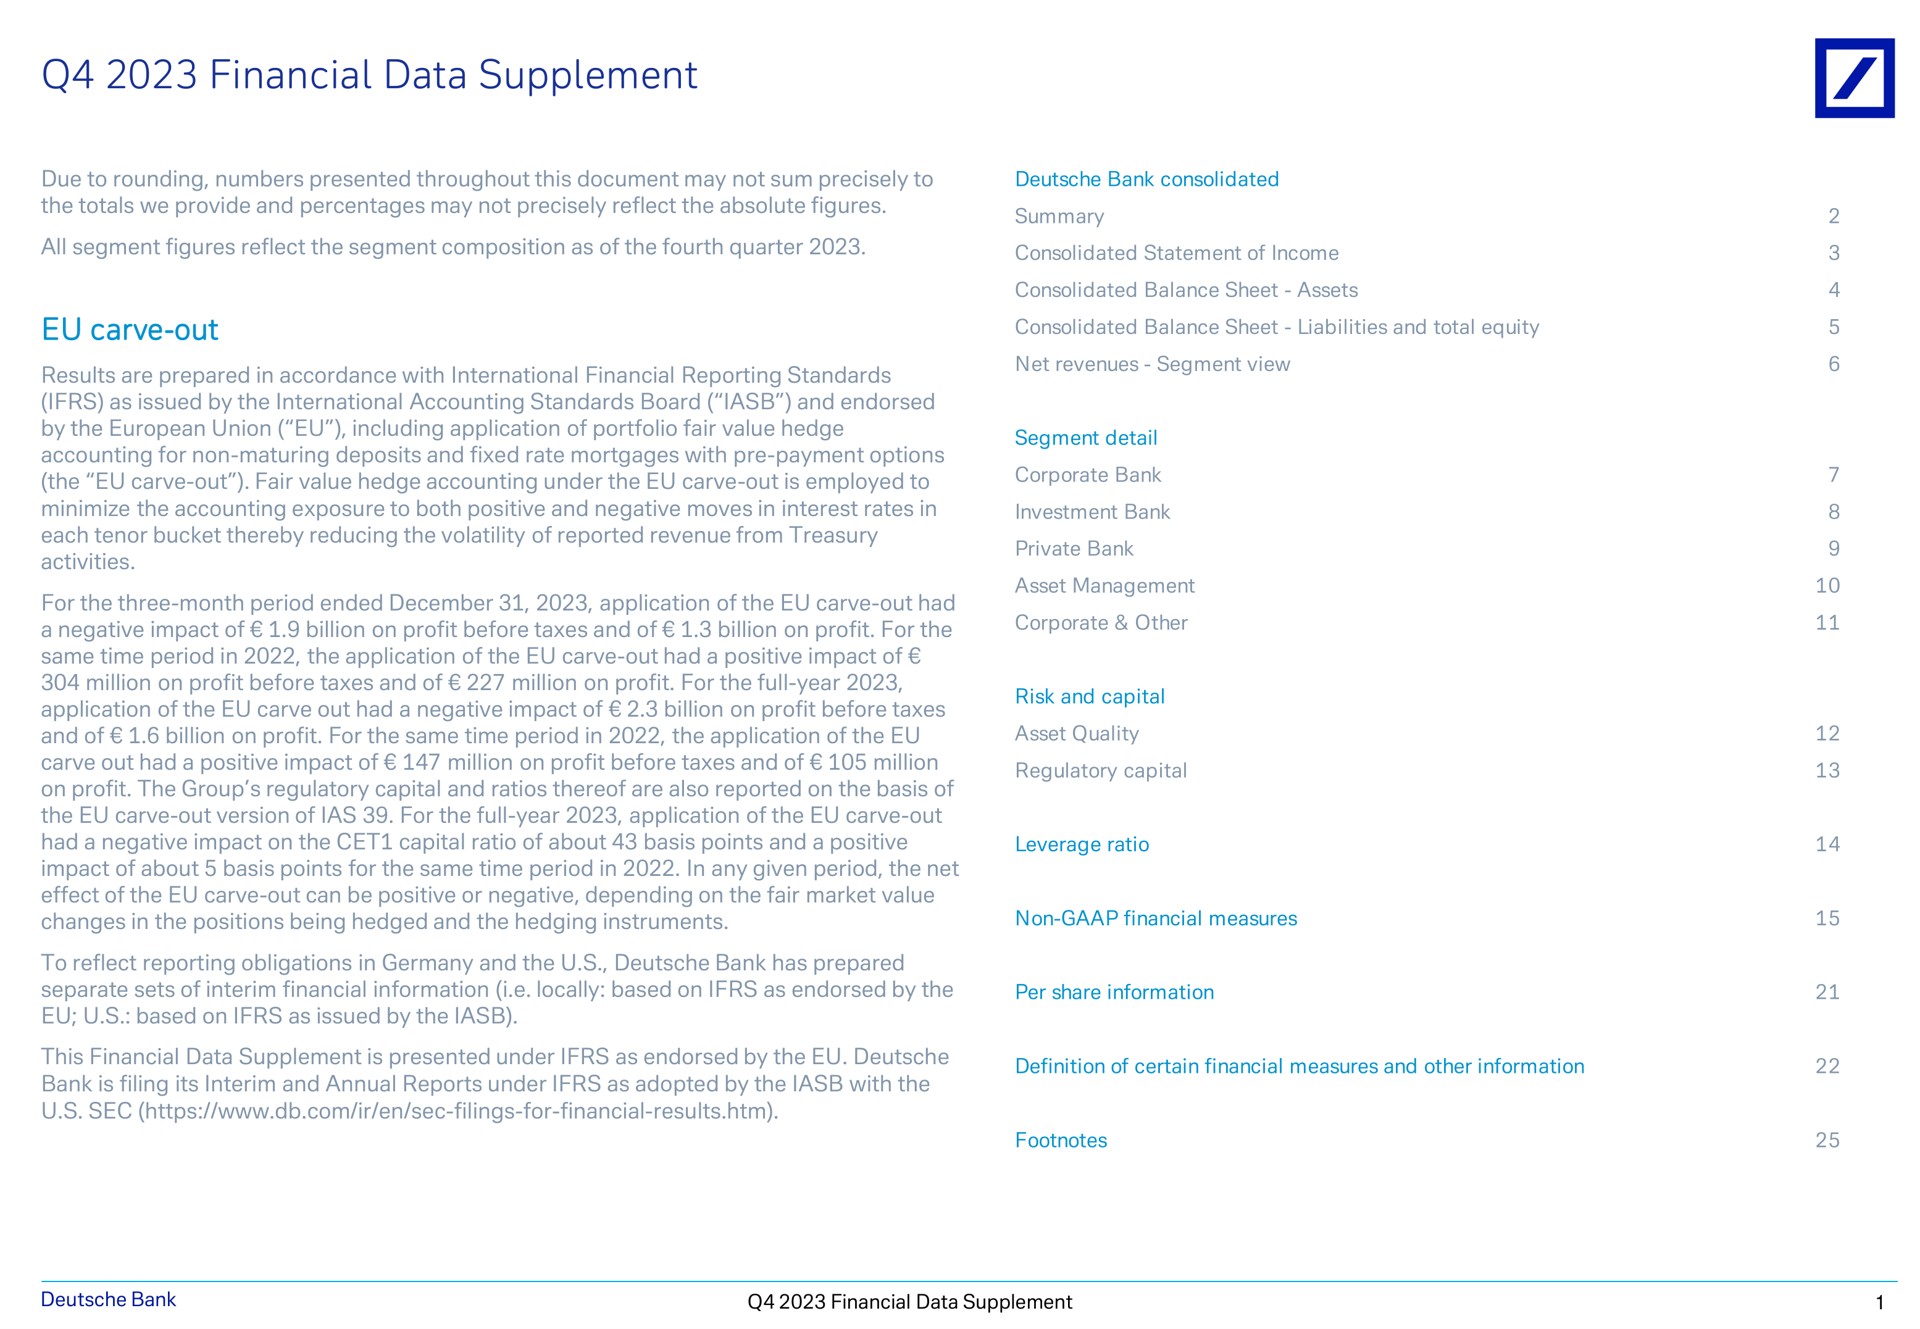 financial data supplement carve out due to rounding numbers presented throughout this document may not sum precisely to the totals we provide and percentages may not precisely reflect the absolute figures all segment figures reflect the segment composition as of the fourth quarter results are prepared in accordance with international reporting standards as issued by the international accounting standards board and endorsed by the union including application of portfolio fair value hedge accounting for non maturing deposits and fixed rate mortgages with payment options the fair value hedge accounting under the is employed to minimize the accounting exposure to both positive and negative moves in interest rates in each tenor bucket thereby reducing the volatility of reported revenue from treasury activities for the three month period ended application of the had a negative impact of billion on profit before taxes and of billion on profit for the same time period in the application of the had a positive impact of million on profit before taxes and of million on profit for the full year application of the carve out had a negative impact of billion on profit before taxes and of billion on profit for the same time period in the application of the carve out had a positive impact of million on profit before taxes and of million on profit the group regulatory capital and ratios thereof are also reported on the basis of the version of for the full year application of the had a negative impact on the capital ratio of about basis points and a positive impact of about basis points for the same time period in in any given period the net effect of the can be positive or negative depending on the fair market value changes in the positions being hedged and the hedging instruments bank consolidated summary consolidated statement of income consolidated balance sheet assets consolidated balance sheet liabilities and total equity net revenues segment view segment detail corporate bank investment bank private bank asset management corporate other risk and capital regulatory capital leverage ratio non measures to reflect reporting obligations in and the bank has prepared separate sets of interim information i locally based on as endorsed by the based on as issued by the per share information this is presented under as endorsed by the bank is filing its interim and annual reports under as adopted by the with the sec definition of certain measures and other information footnotes bank a | Deutsche Bank